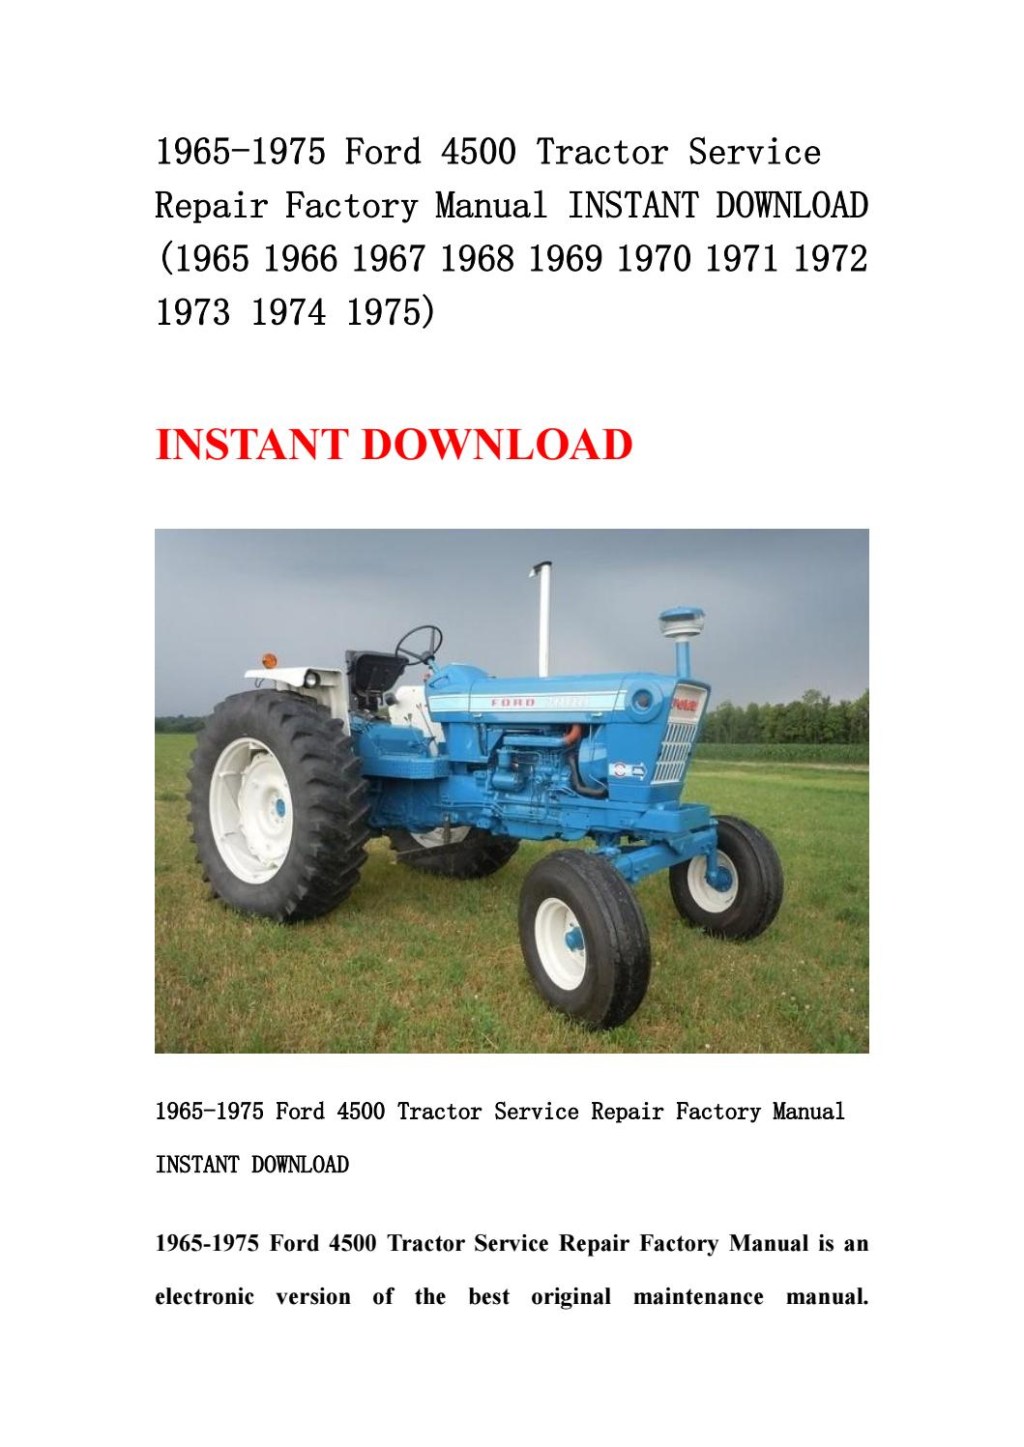 Picture of: ford  tractor service repair factory manual instant